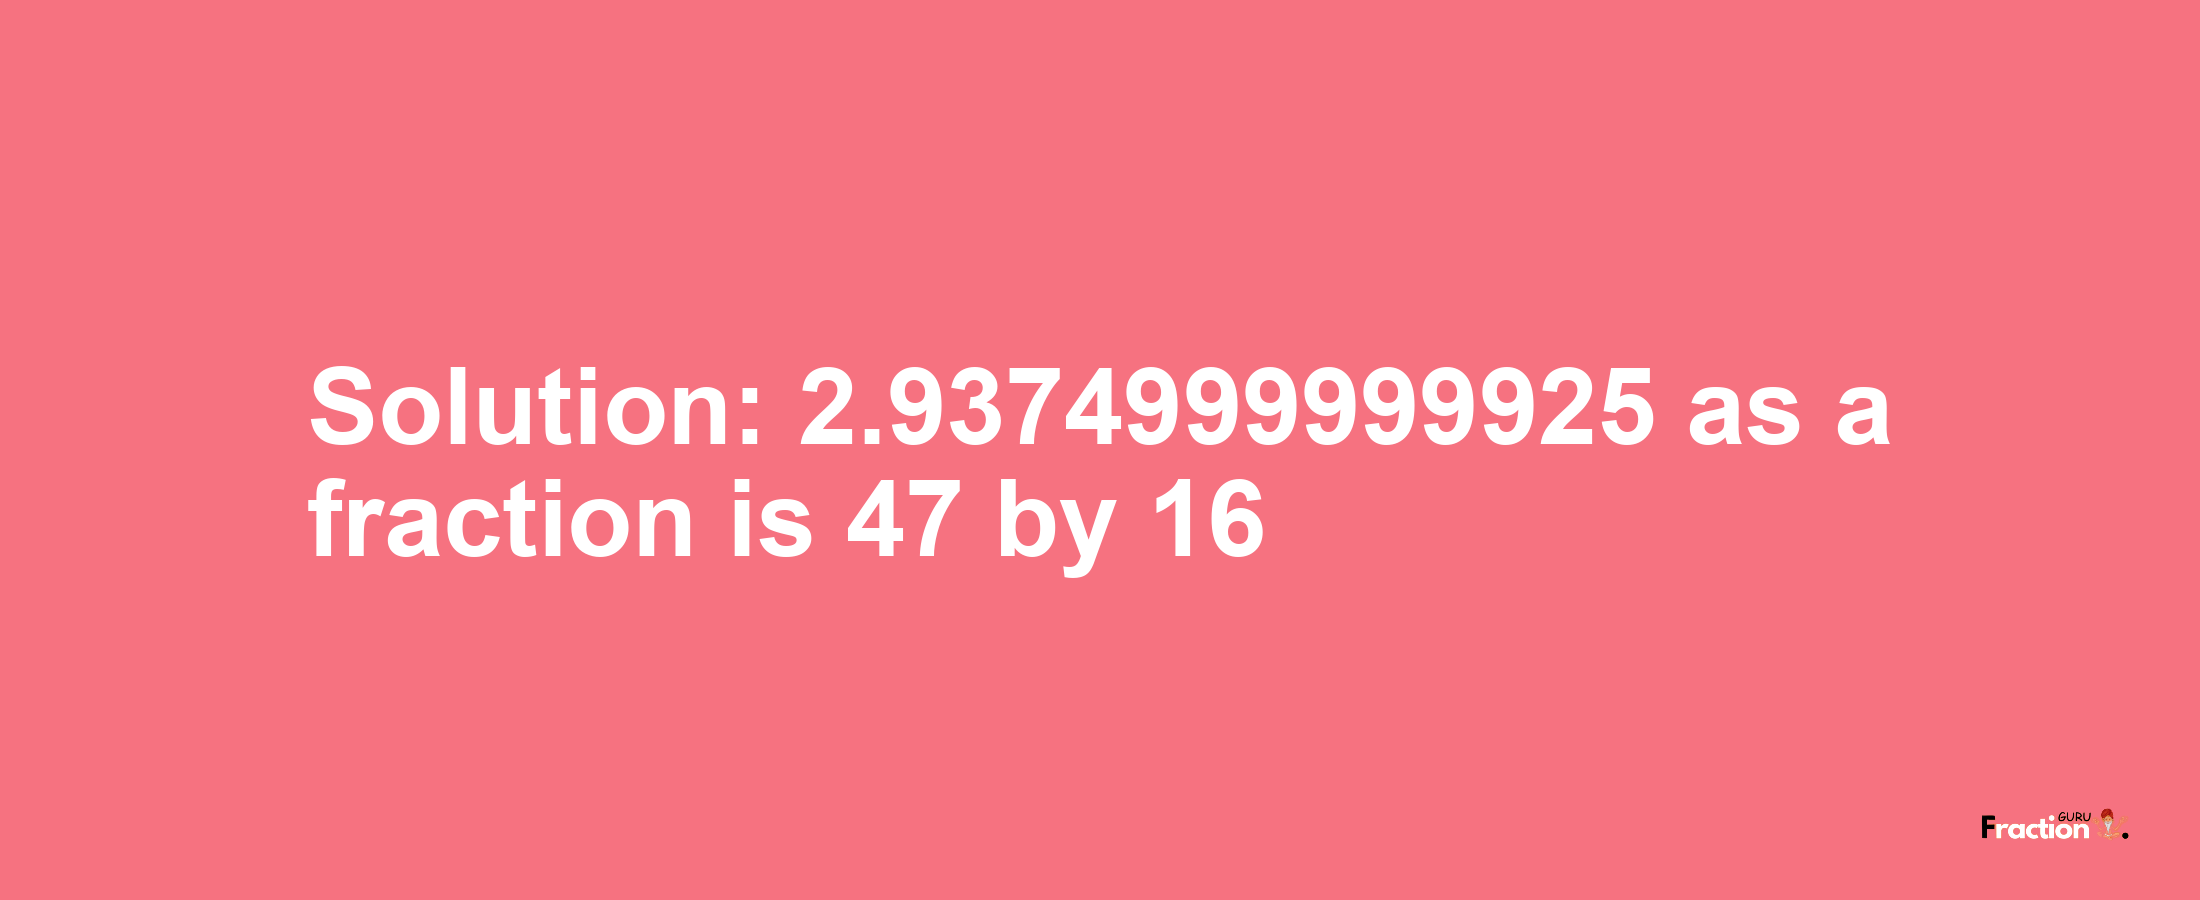 Solution:2.9374999999925 as a fraction is 47/16